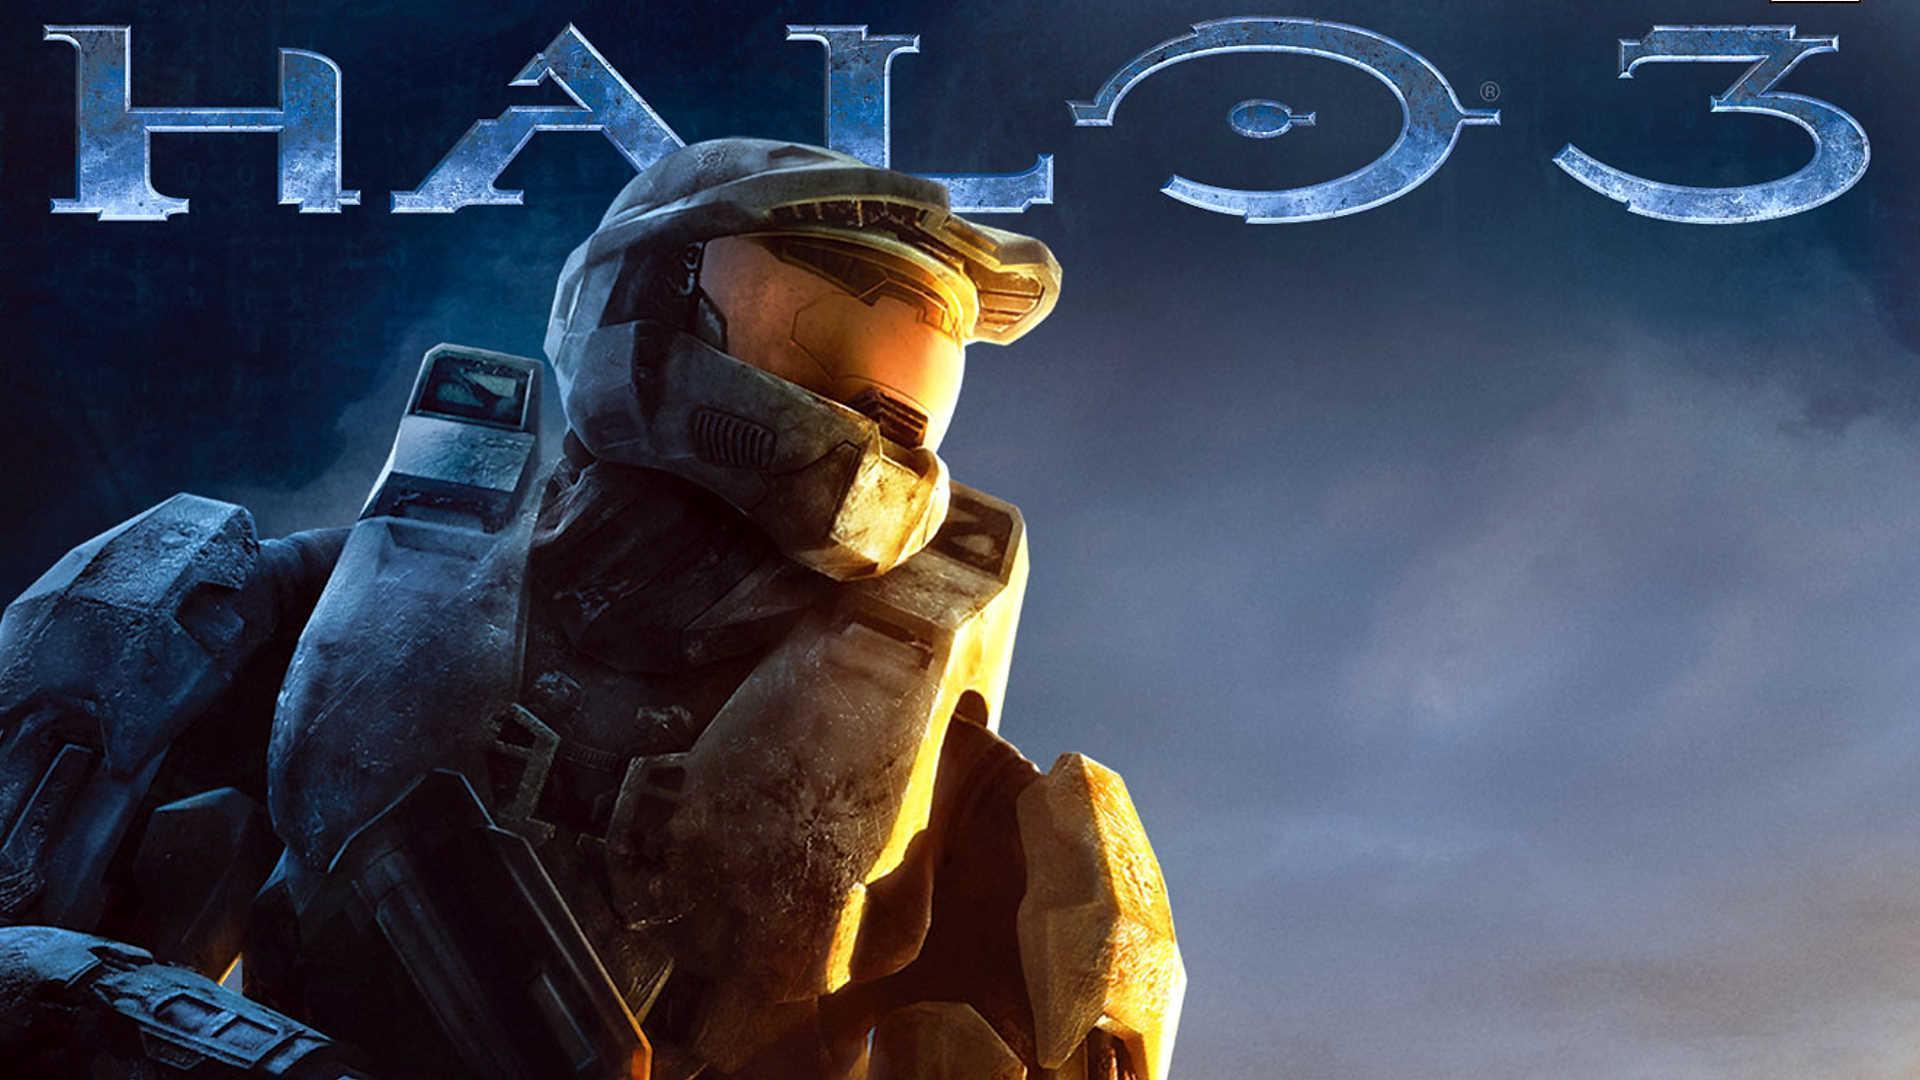 Halo 3 HD widescreen wallpapers